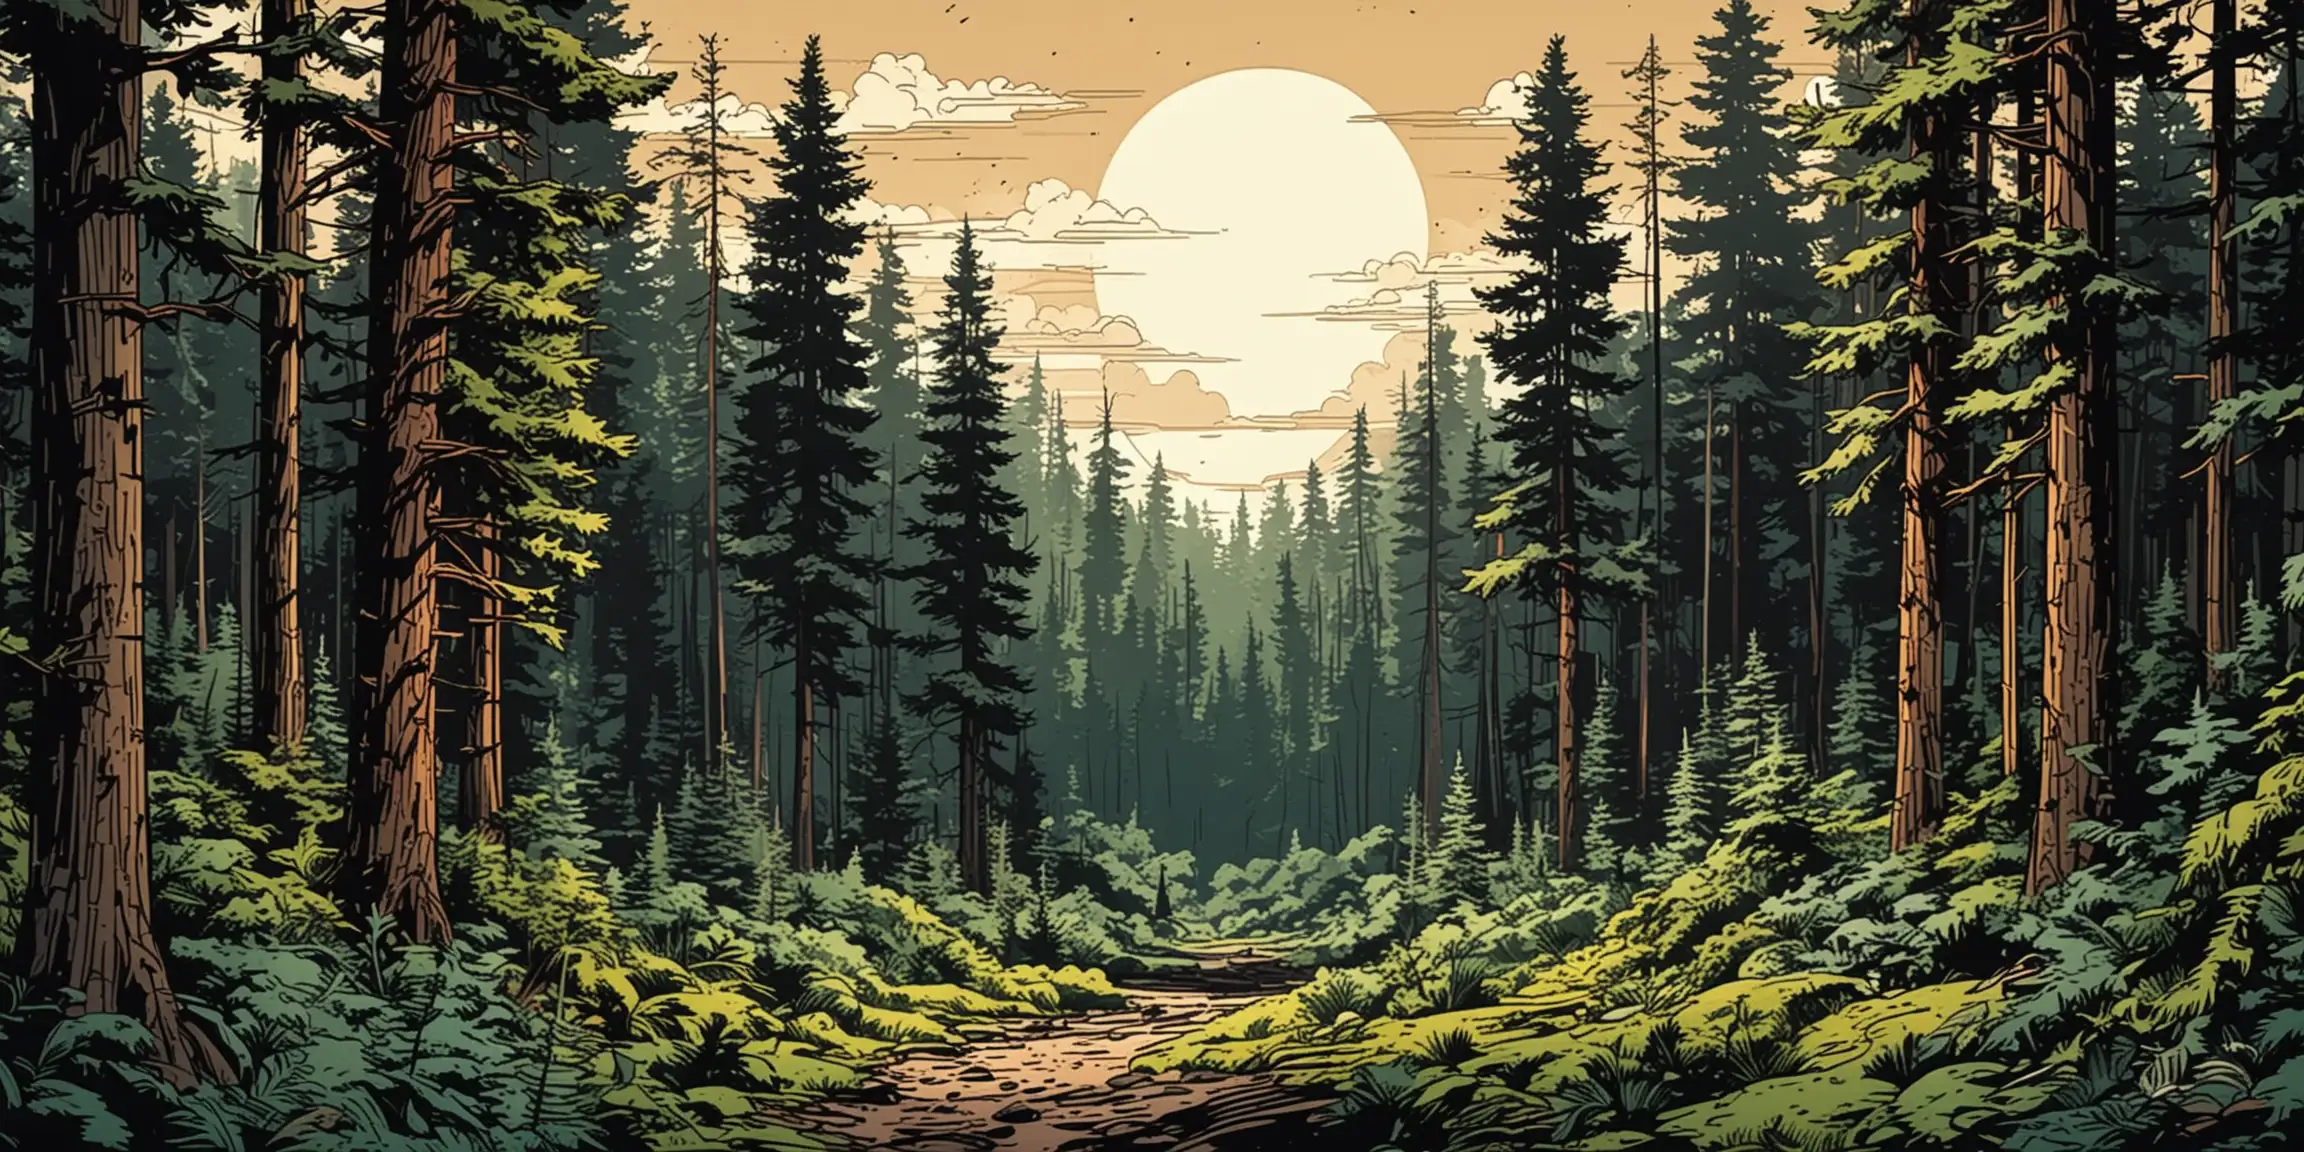 Comic book style:  A lush forest with pine trees.  Flat profile